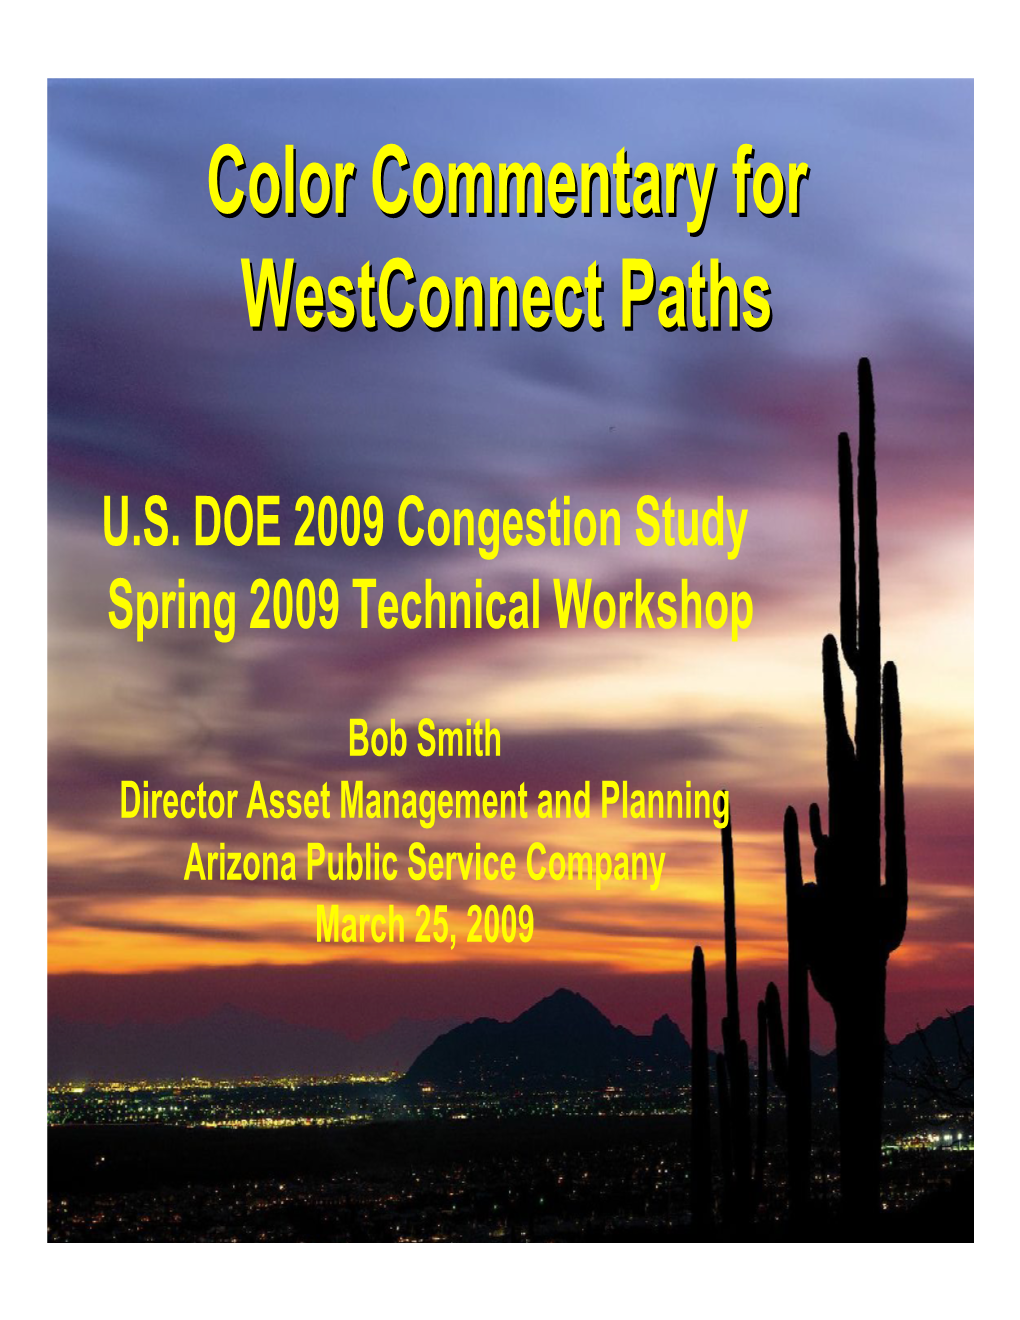 Color Commentary for Westconnect Paths